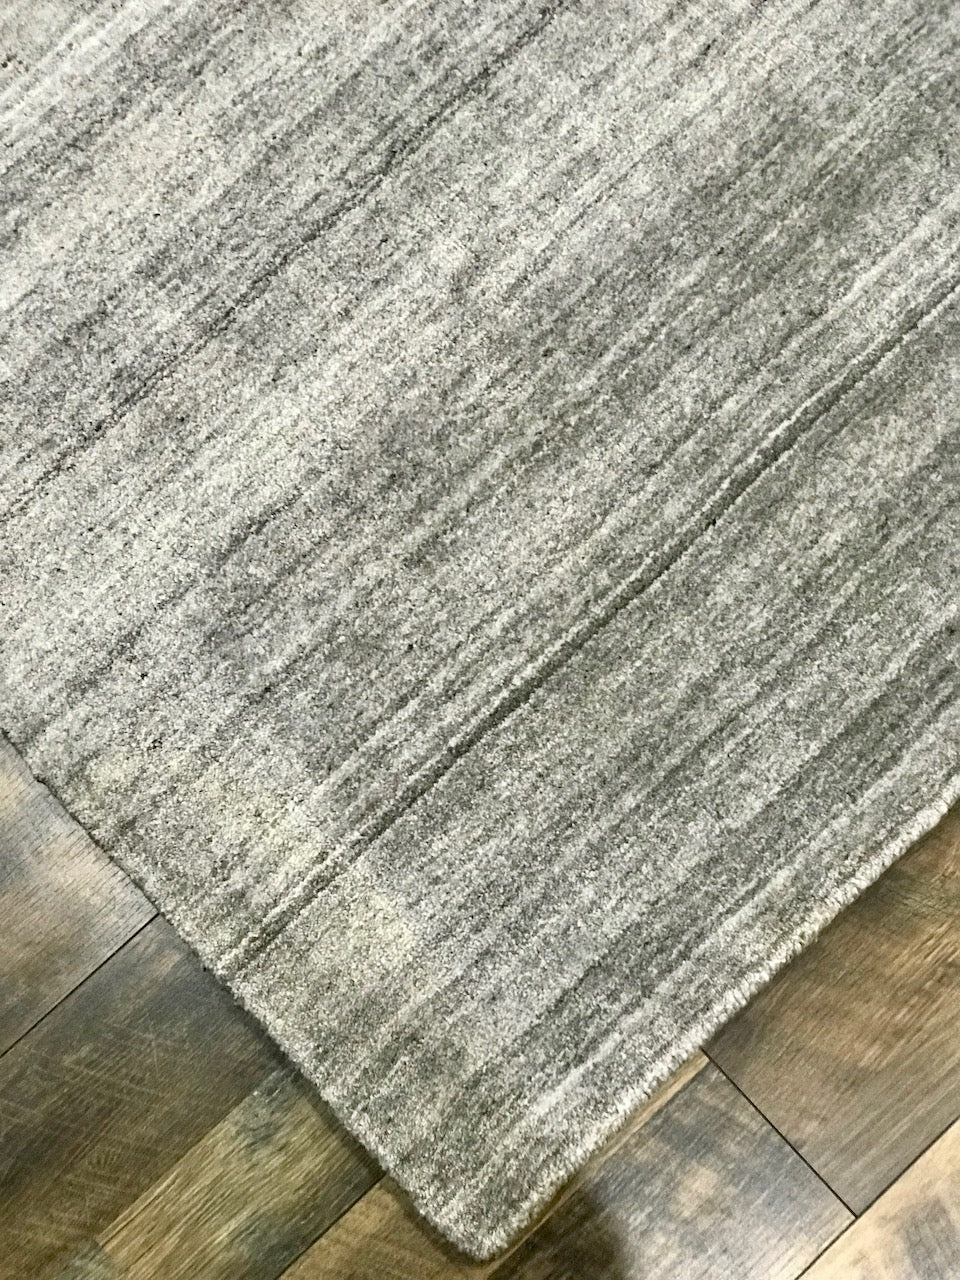 refined carpet rugs area rugs basix collection hand knotted wool and viscose rug solid modern rug online affordable orange county rug store light gray area rug